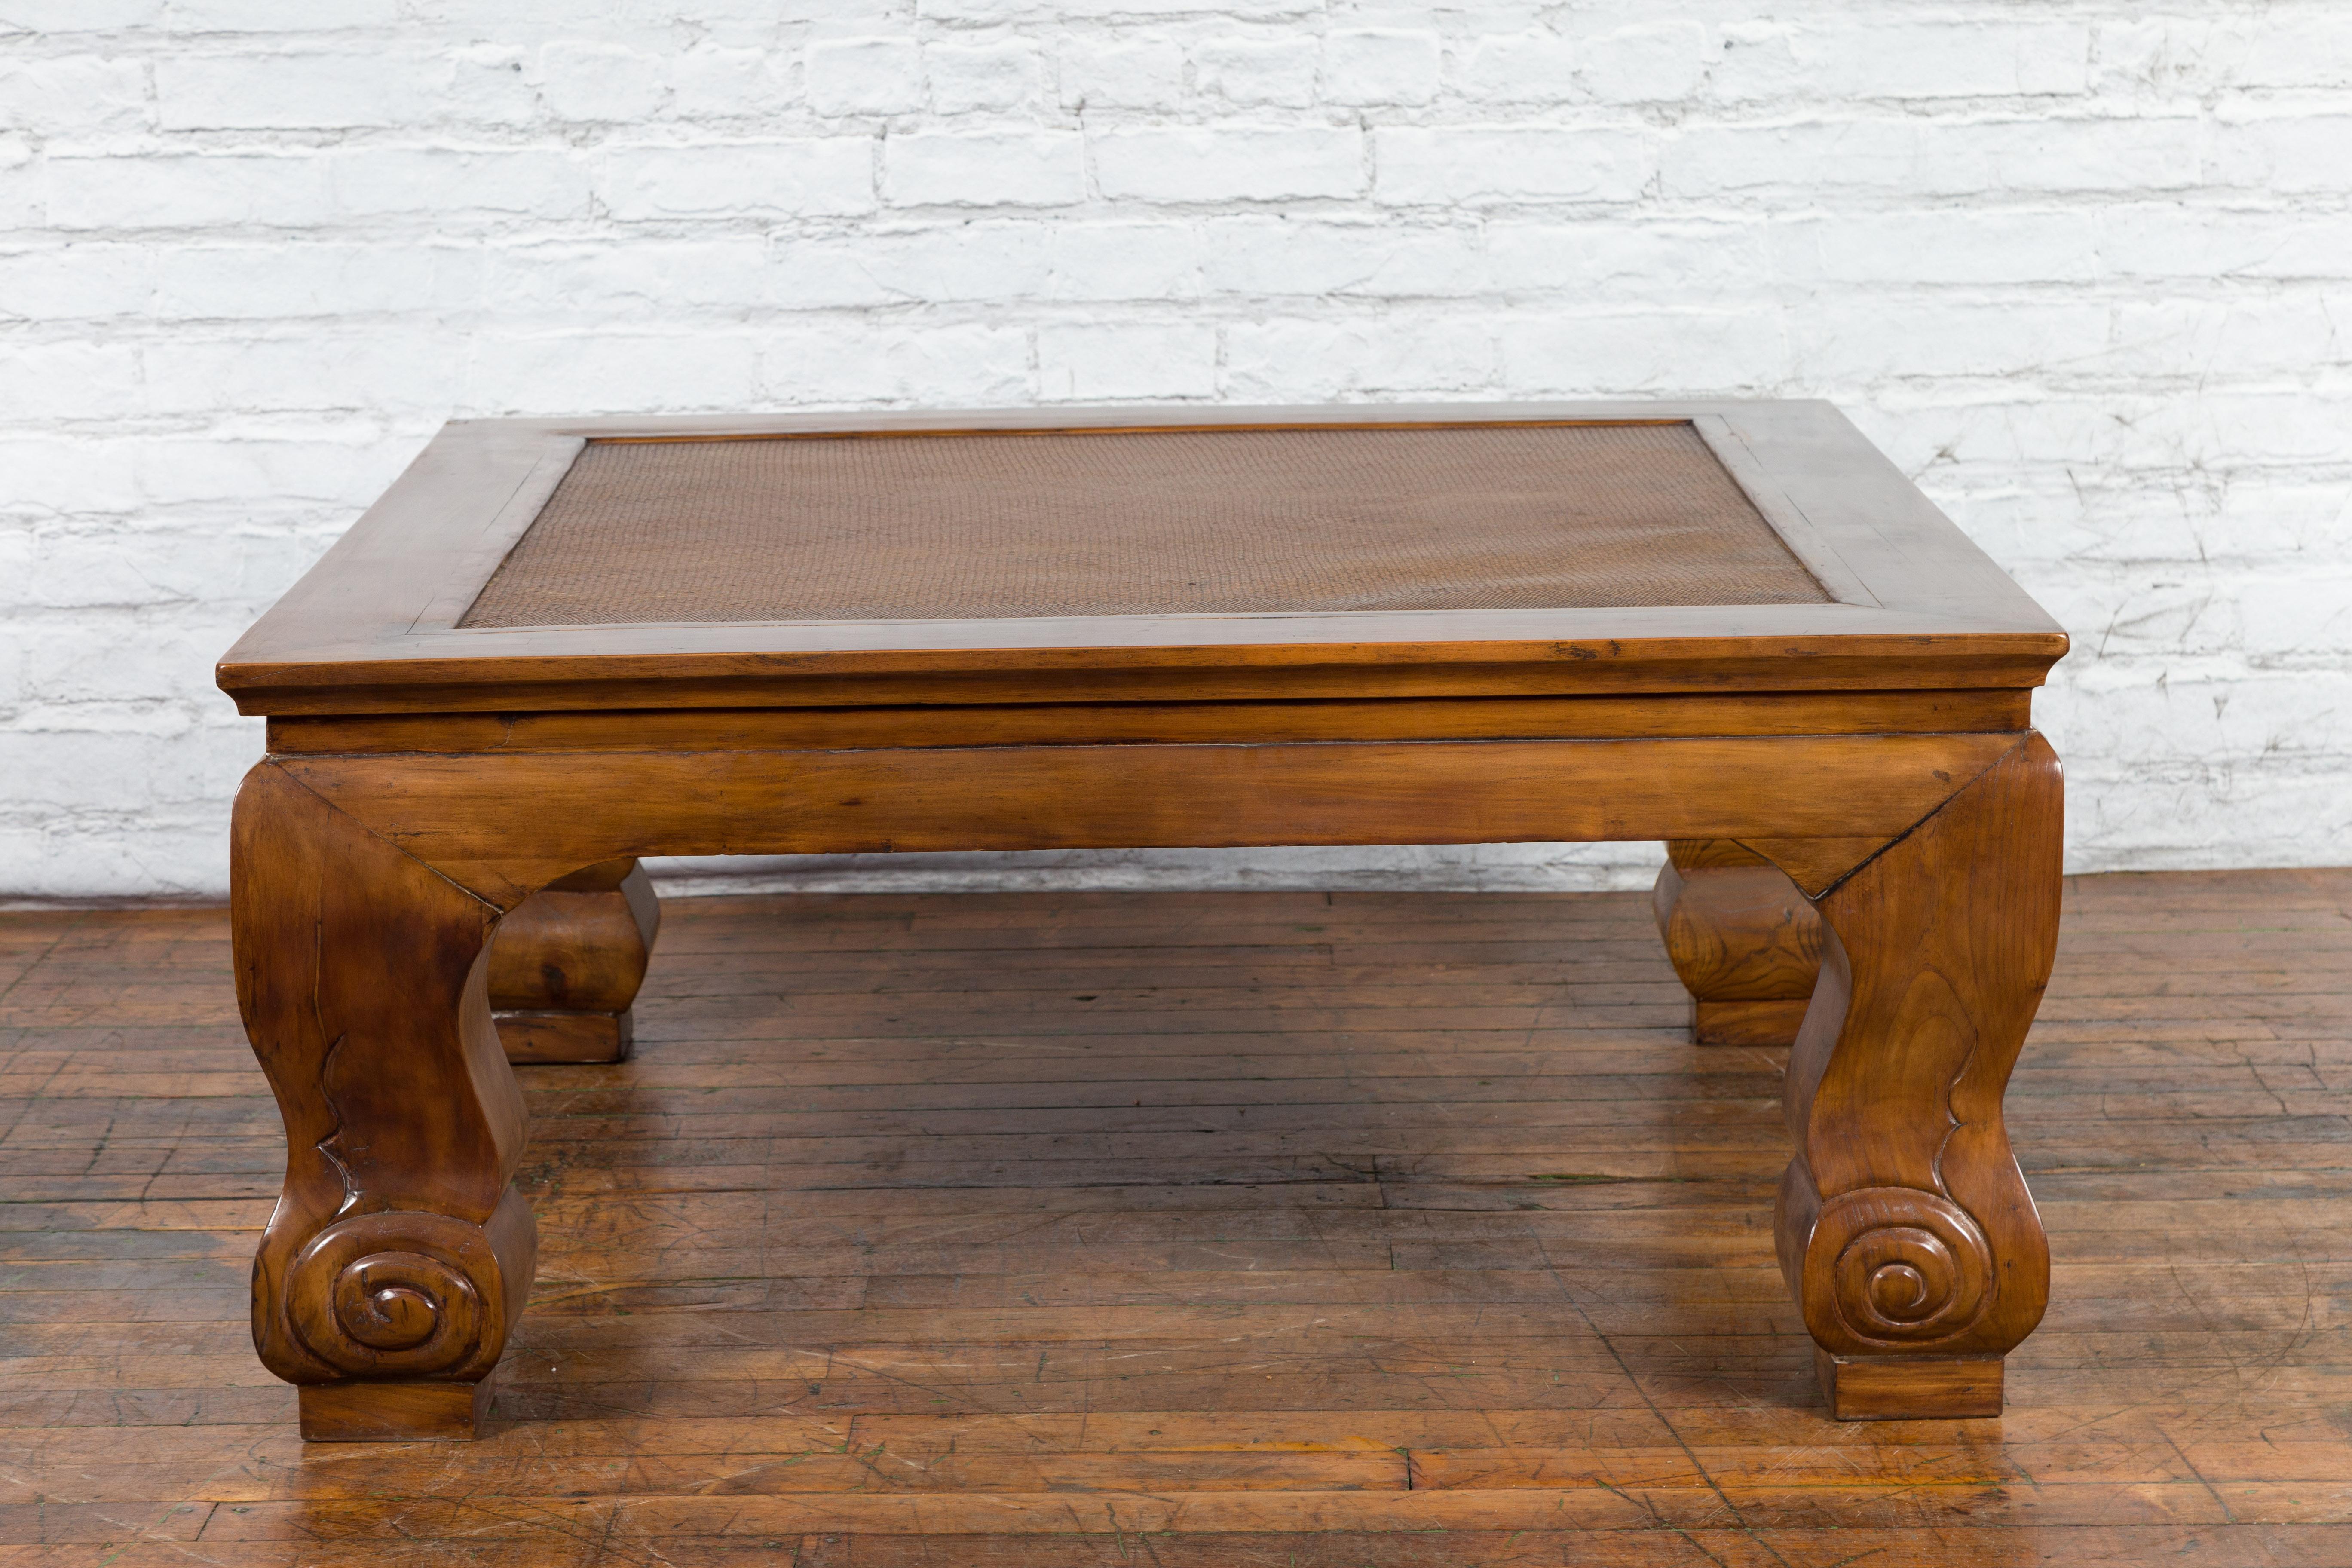 Chinese 19th Century Qing Dynasty Coffee Table with Rattan Top Inset For Sale 11